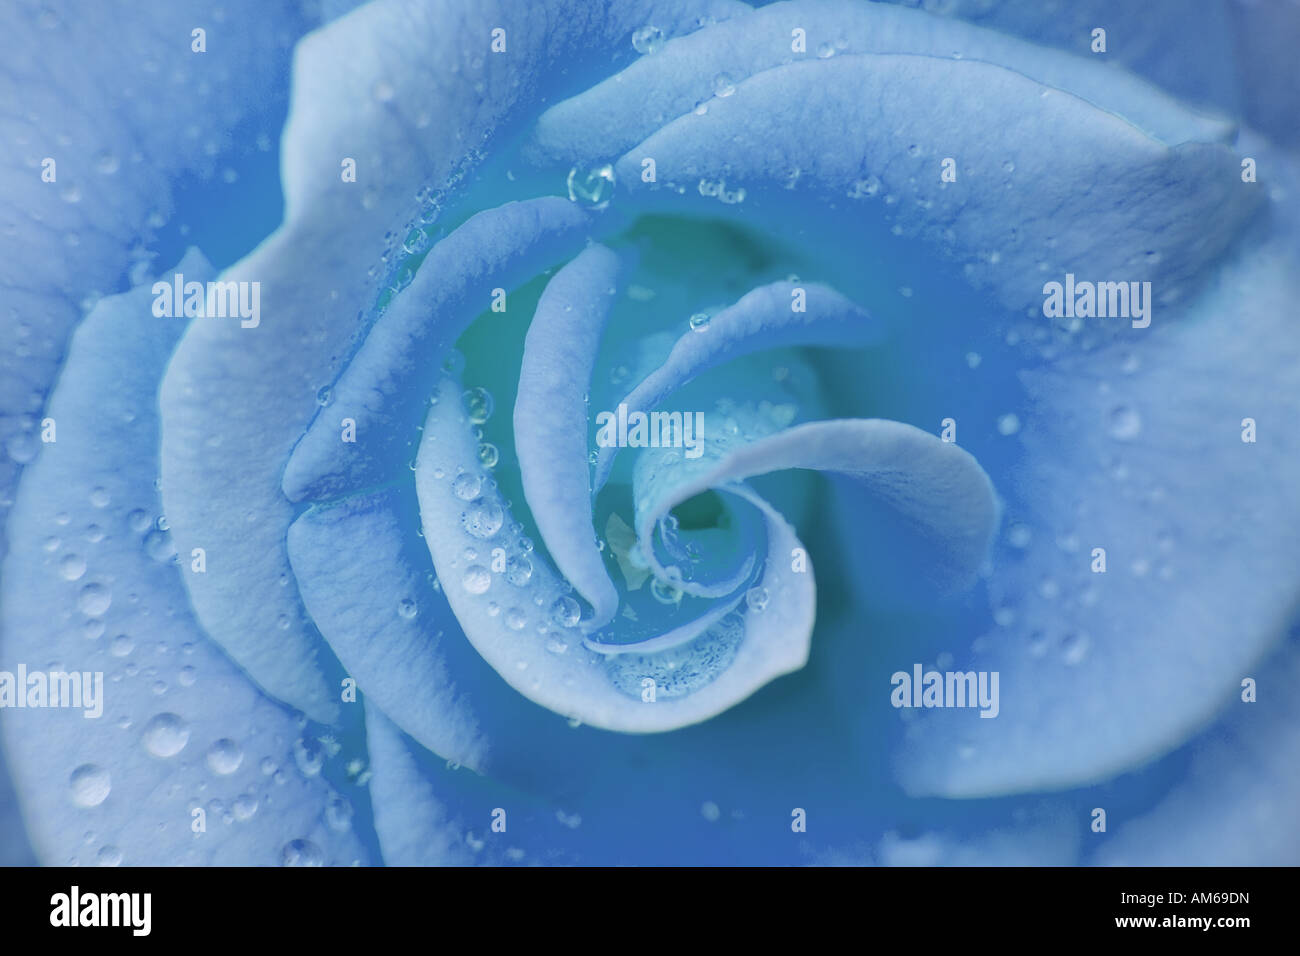 Blue Rose With Water Droplets Stock Photo Alamy